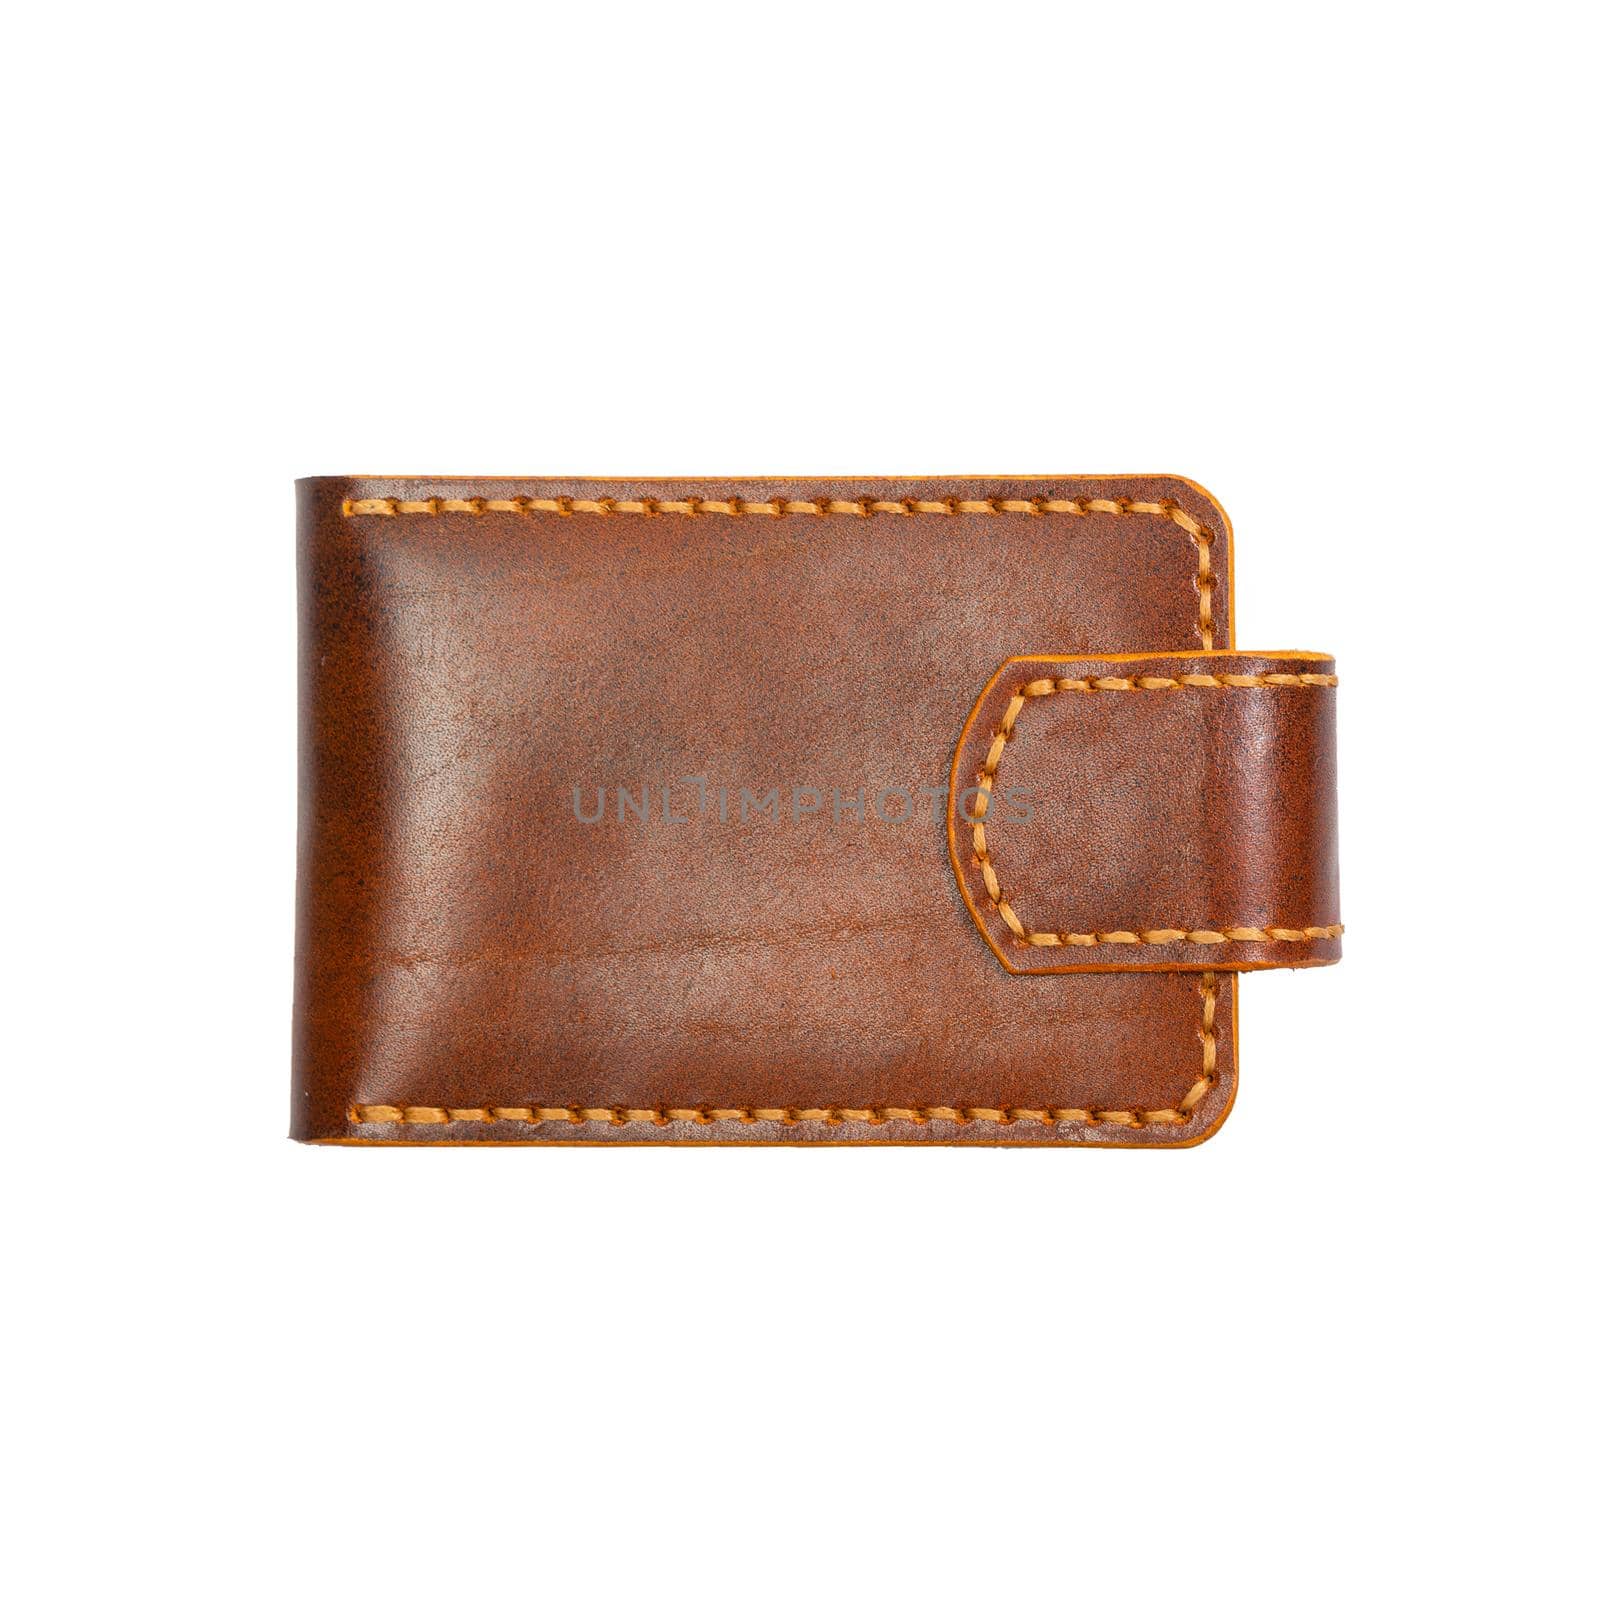 Luxury craft business card holder case made of leather. Brown Leather box for cards isolated on white background. Back side.